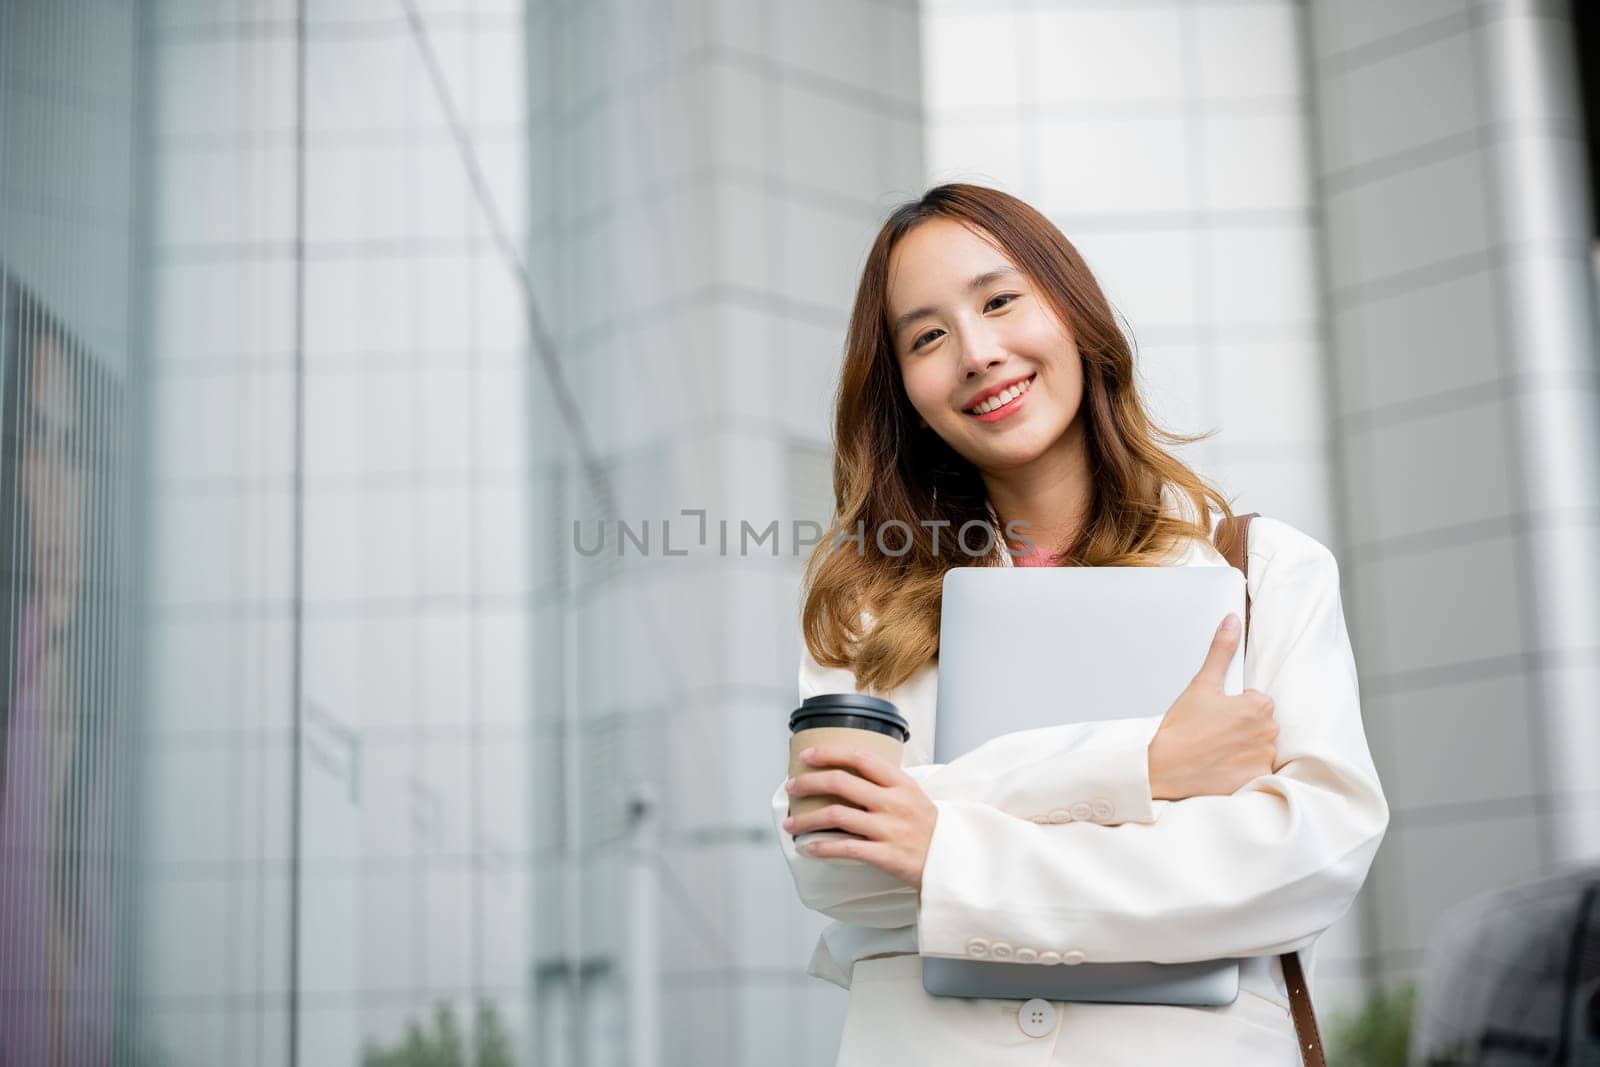 Against the backdrop of a beige wall, a young woman walks through the city with a laptop and a takeaway cup of coffee in her hands. She is smiling, enjoying her digital lifestyle